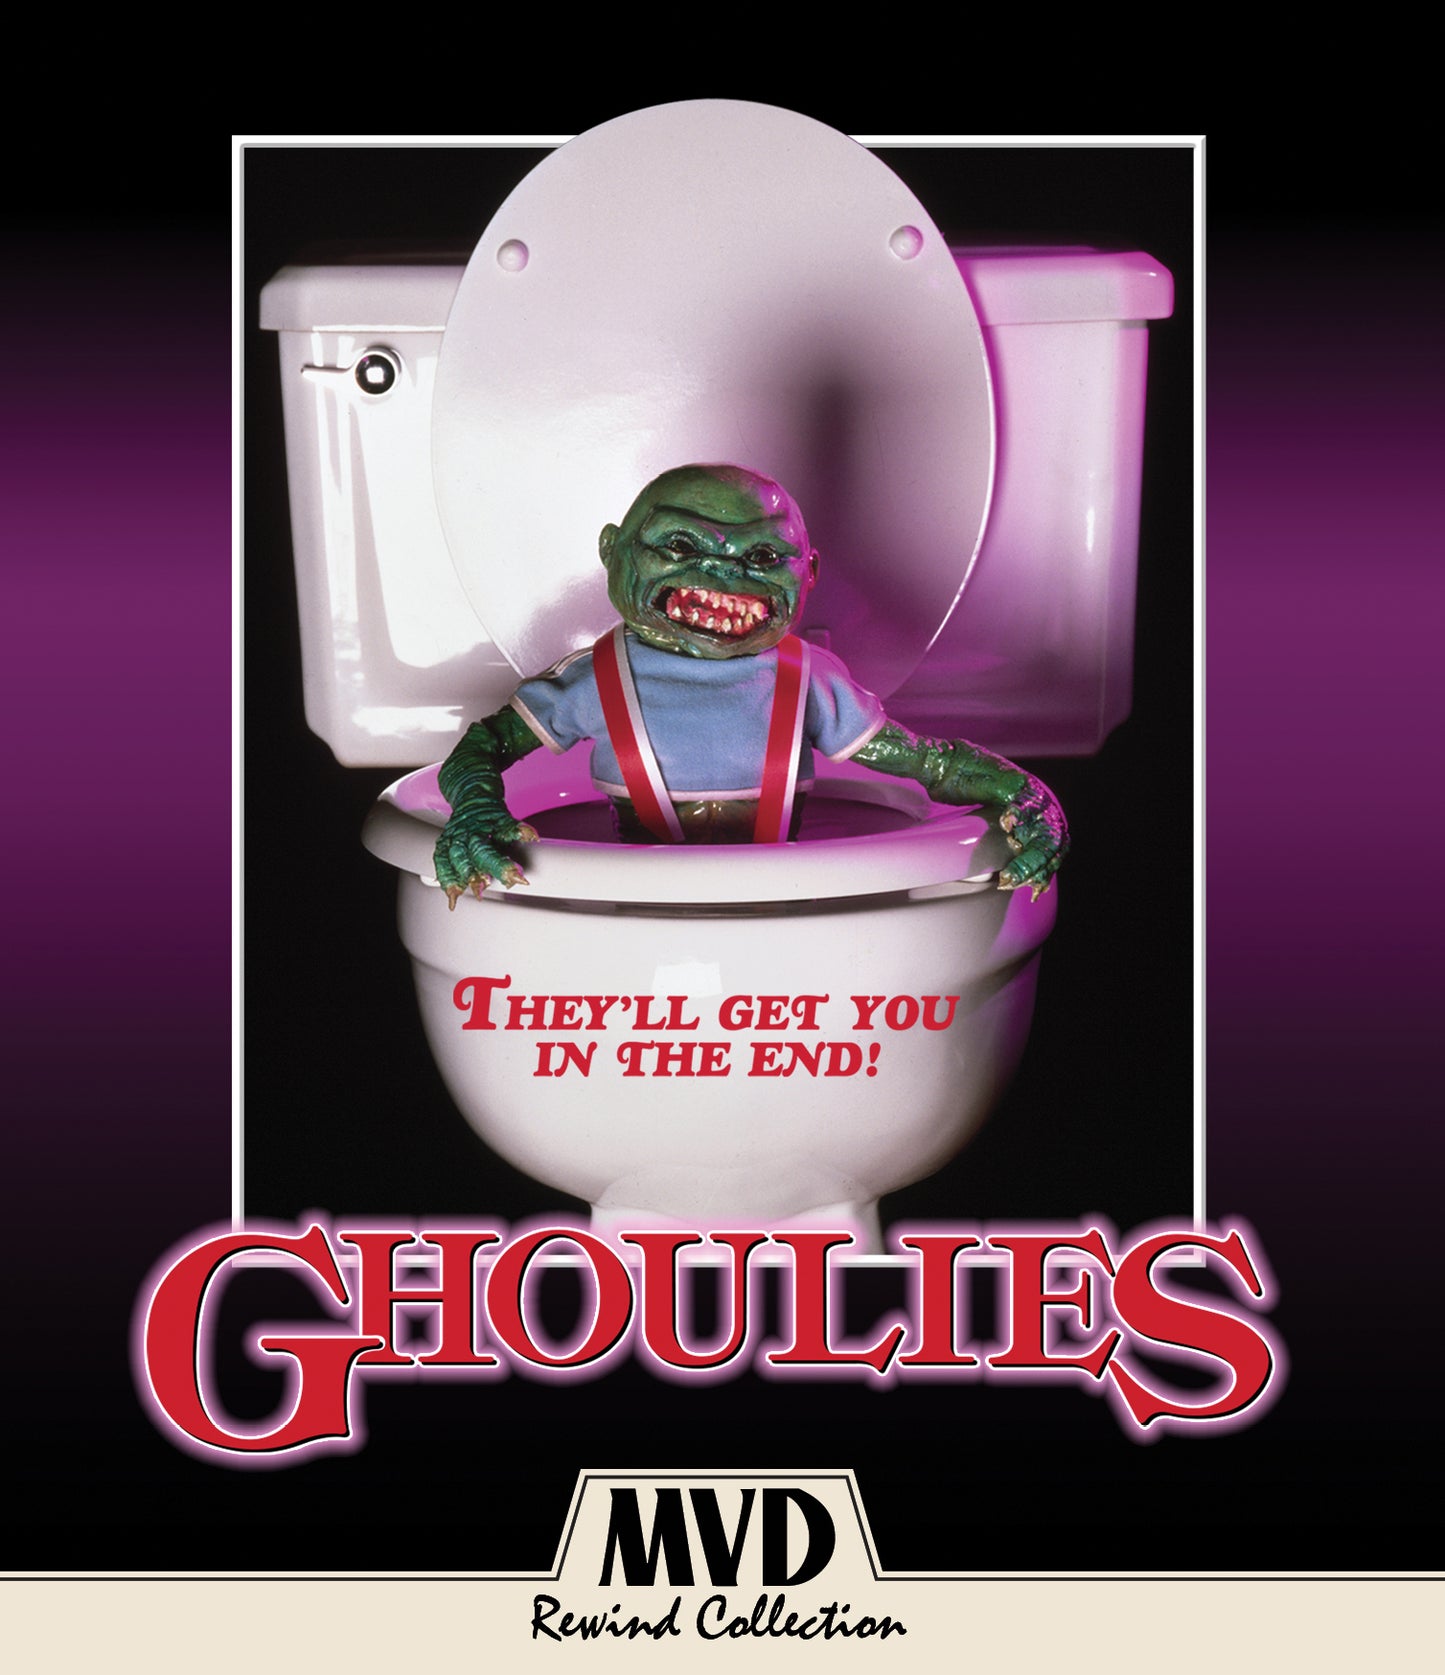 Ghoulies Blu-ray Collector's Edition with Slipcover (MVD)